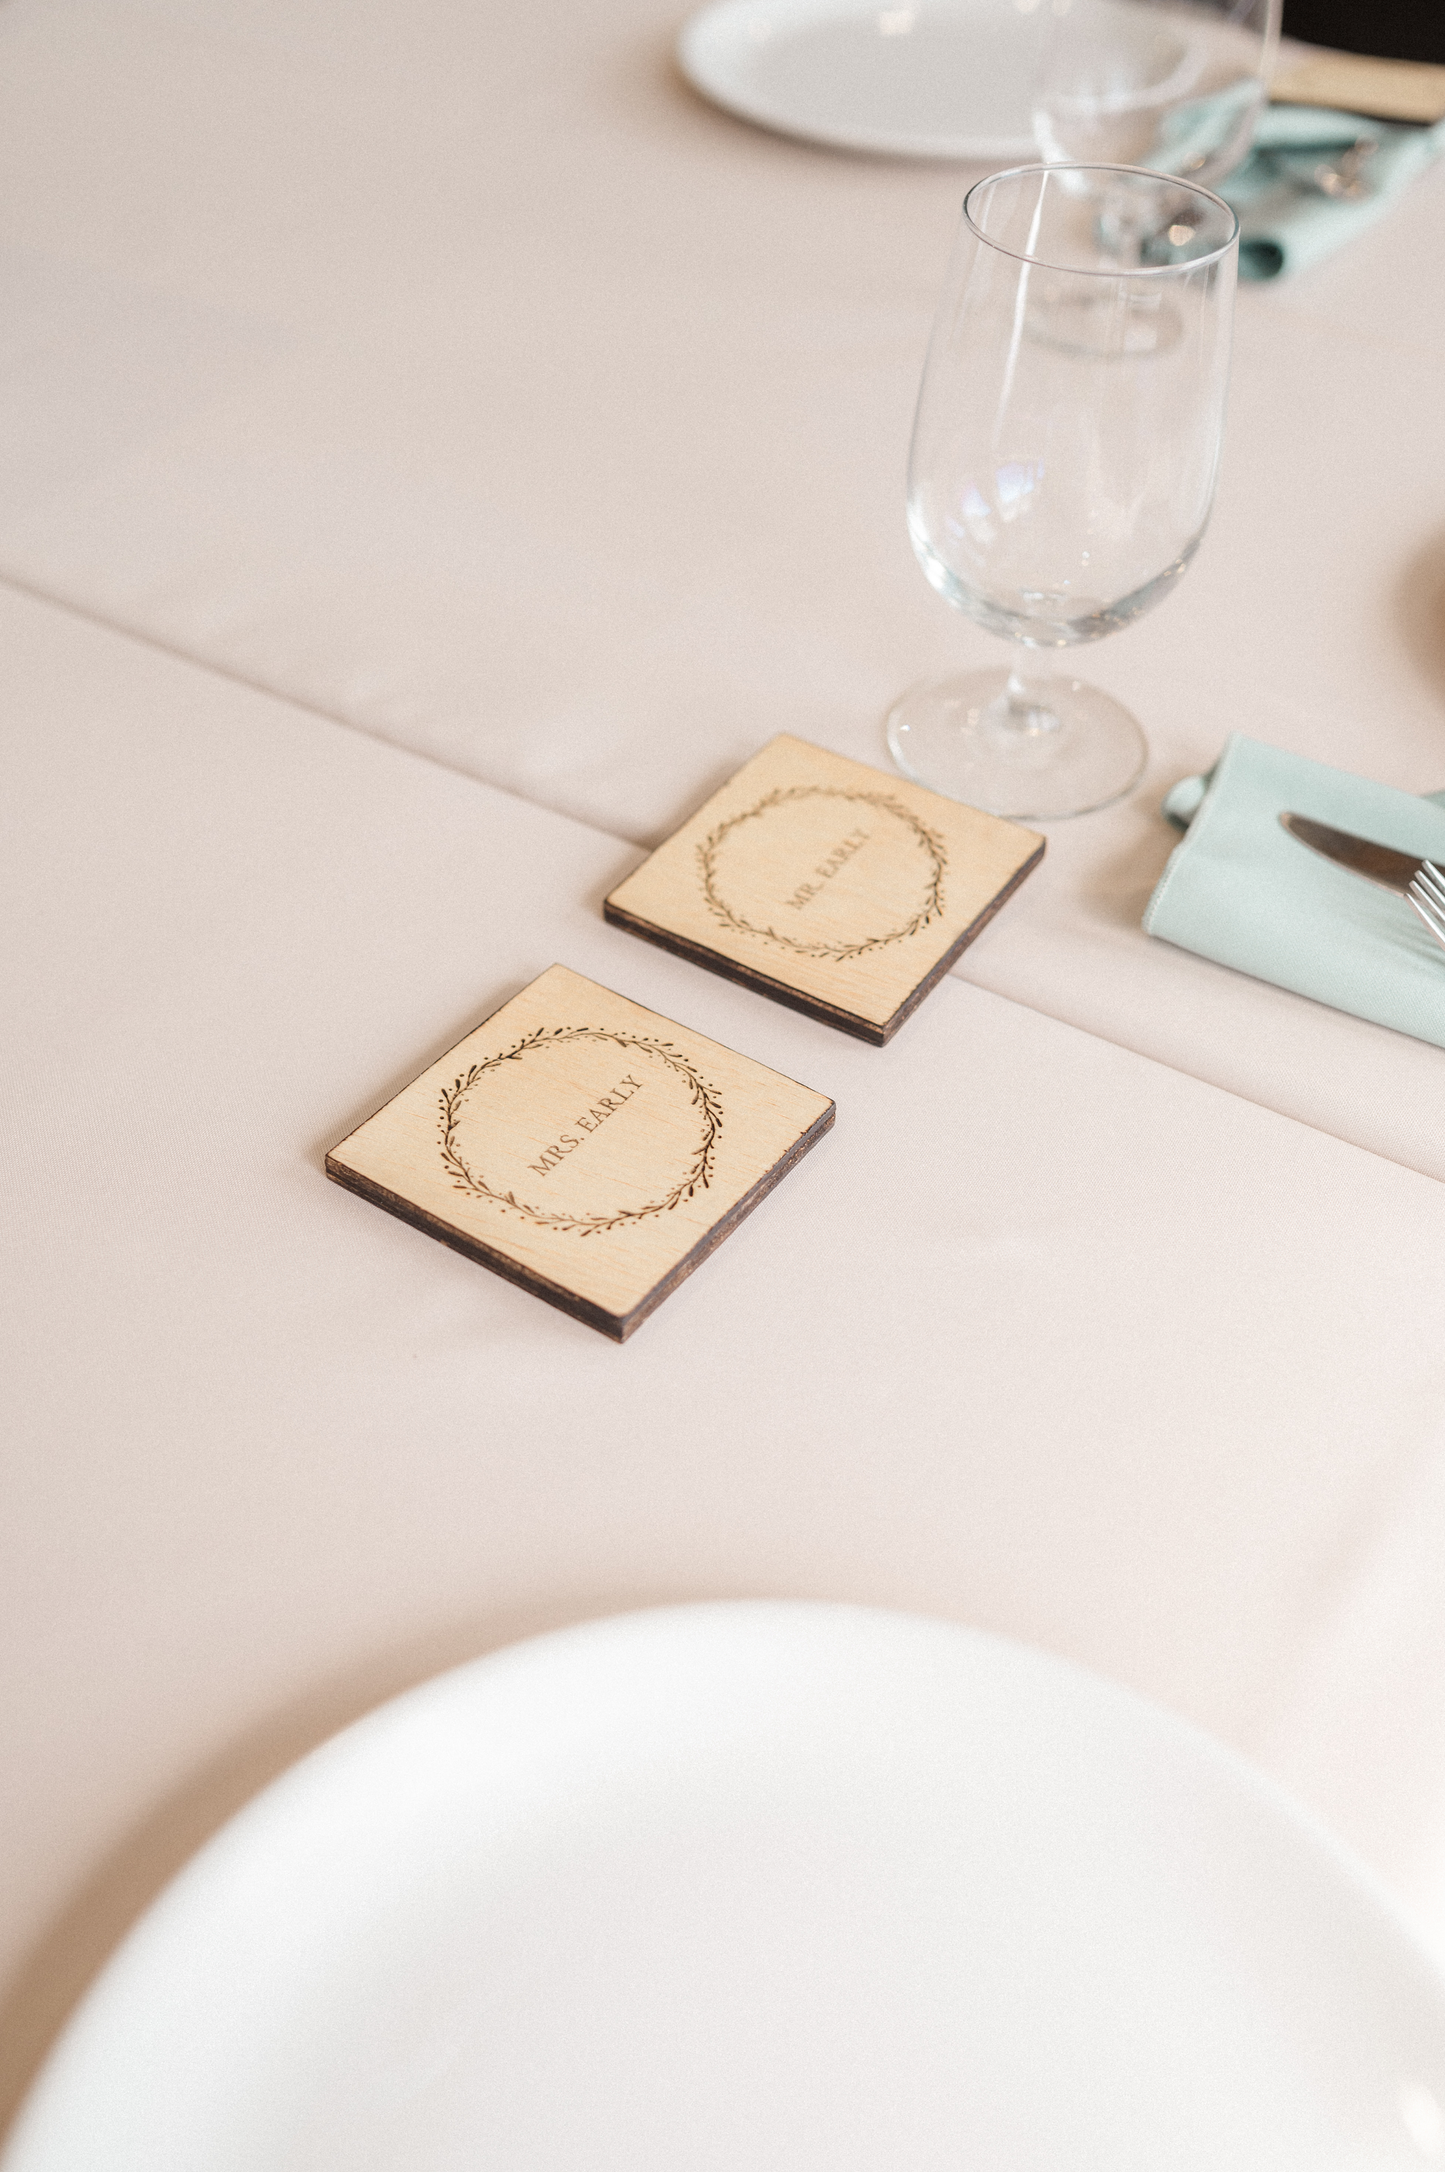 Personalized Wooden Coasters with Name Tag